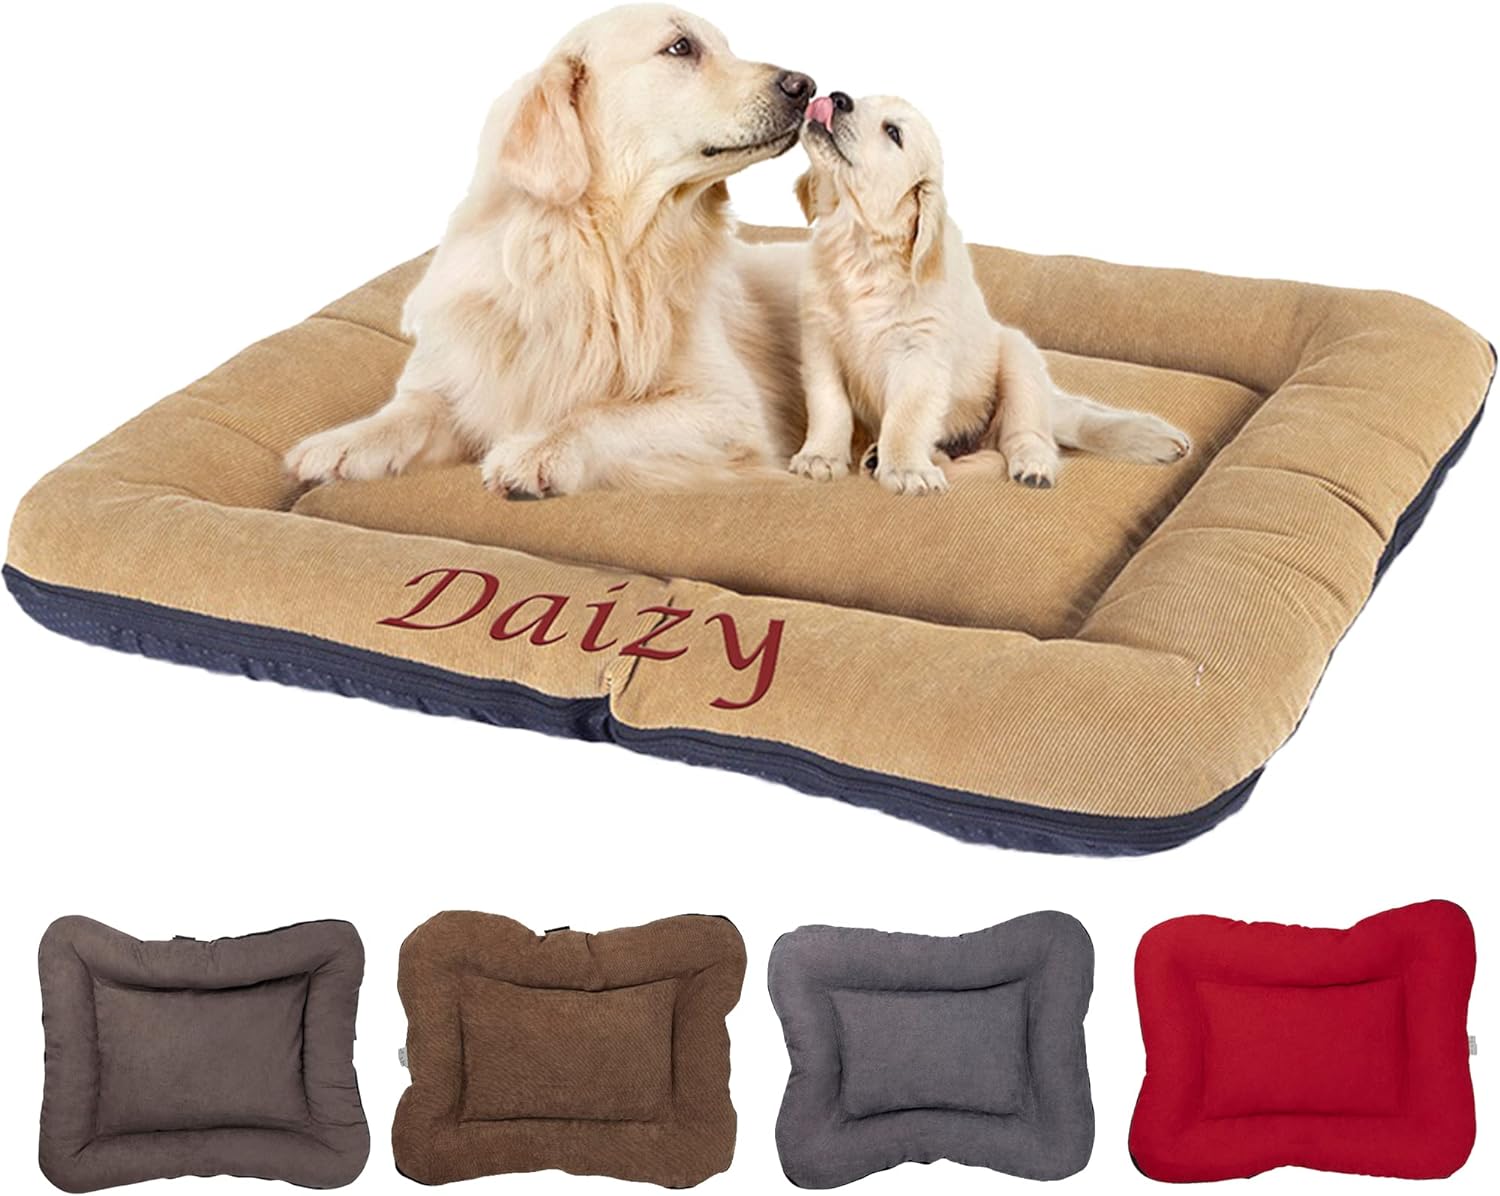 https://iheartdogs.com/wp-content/uploads/2023/09/Padded_Personalized_Dog_Bed.jpg